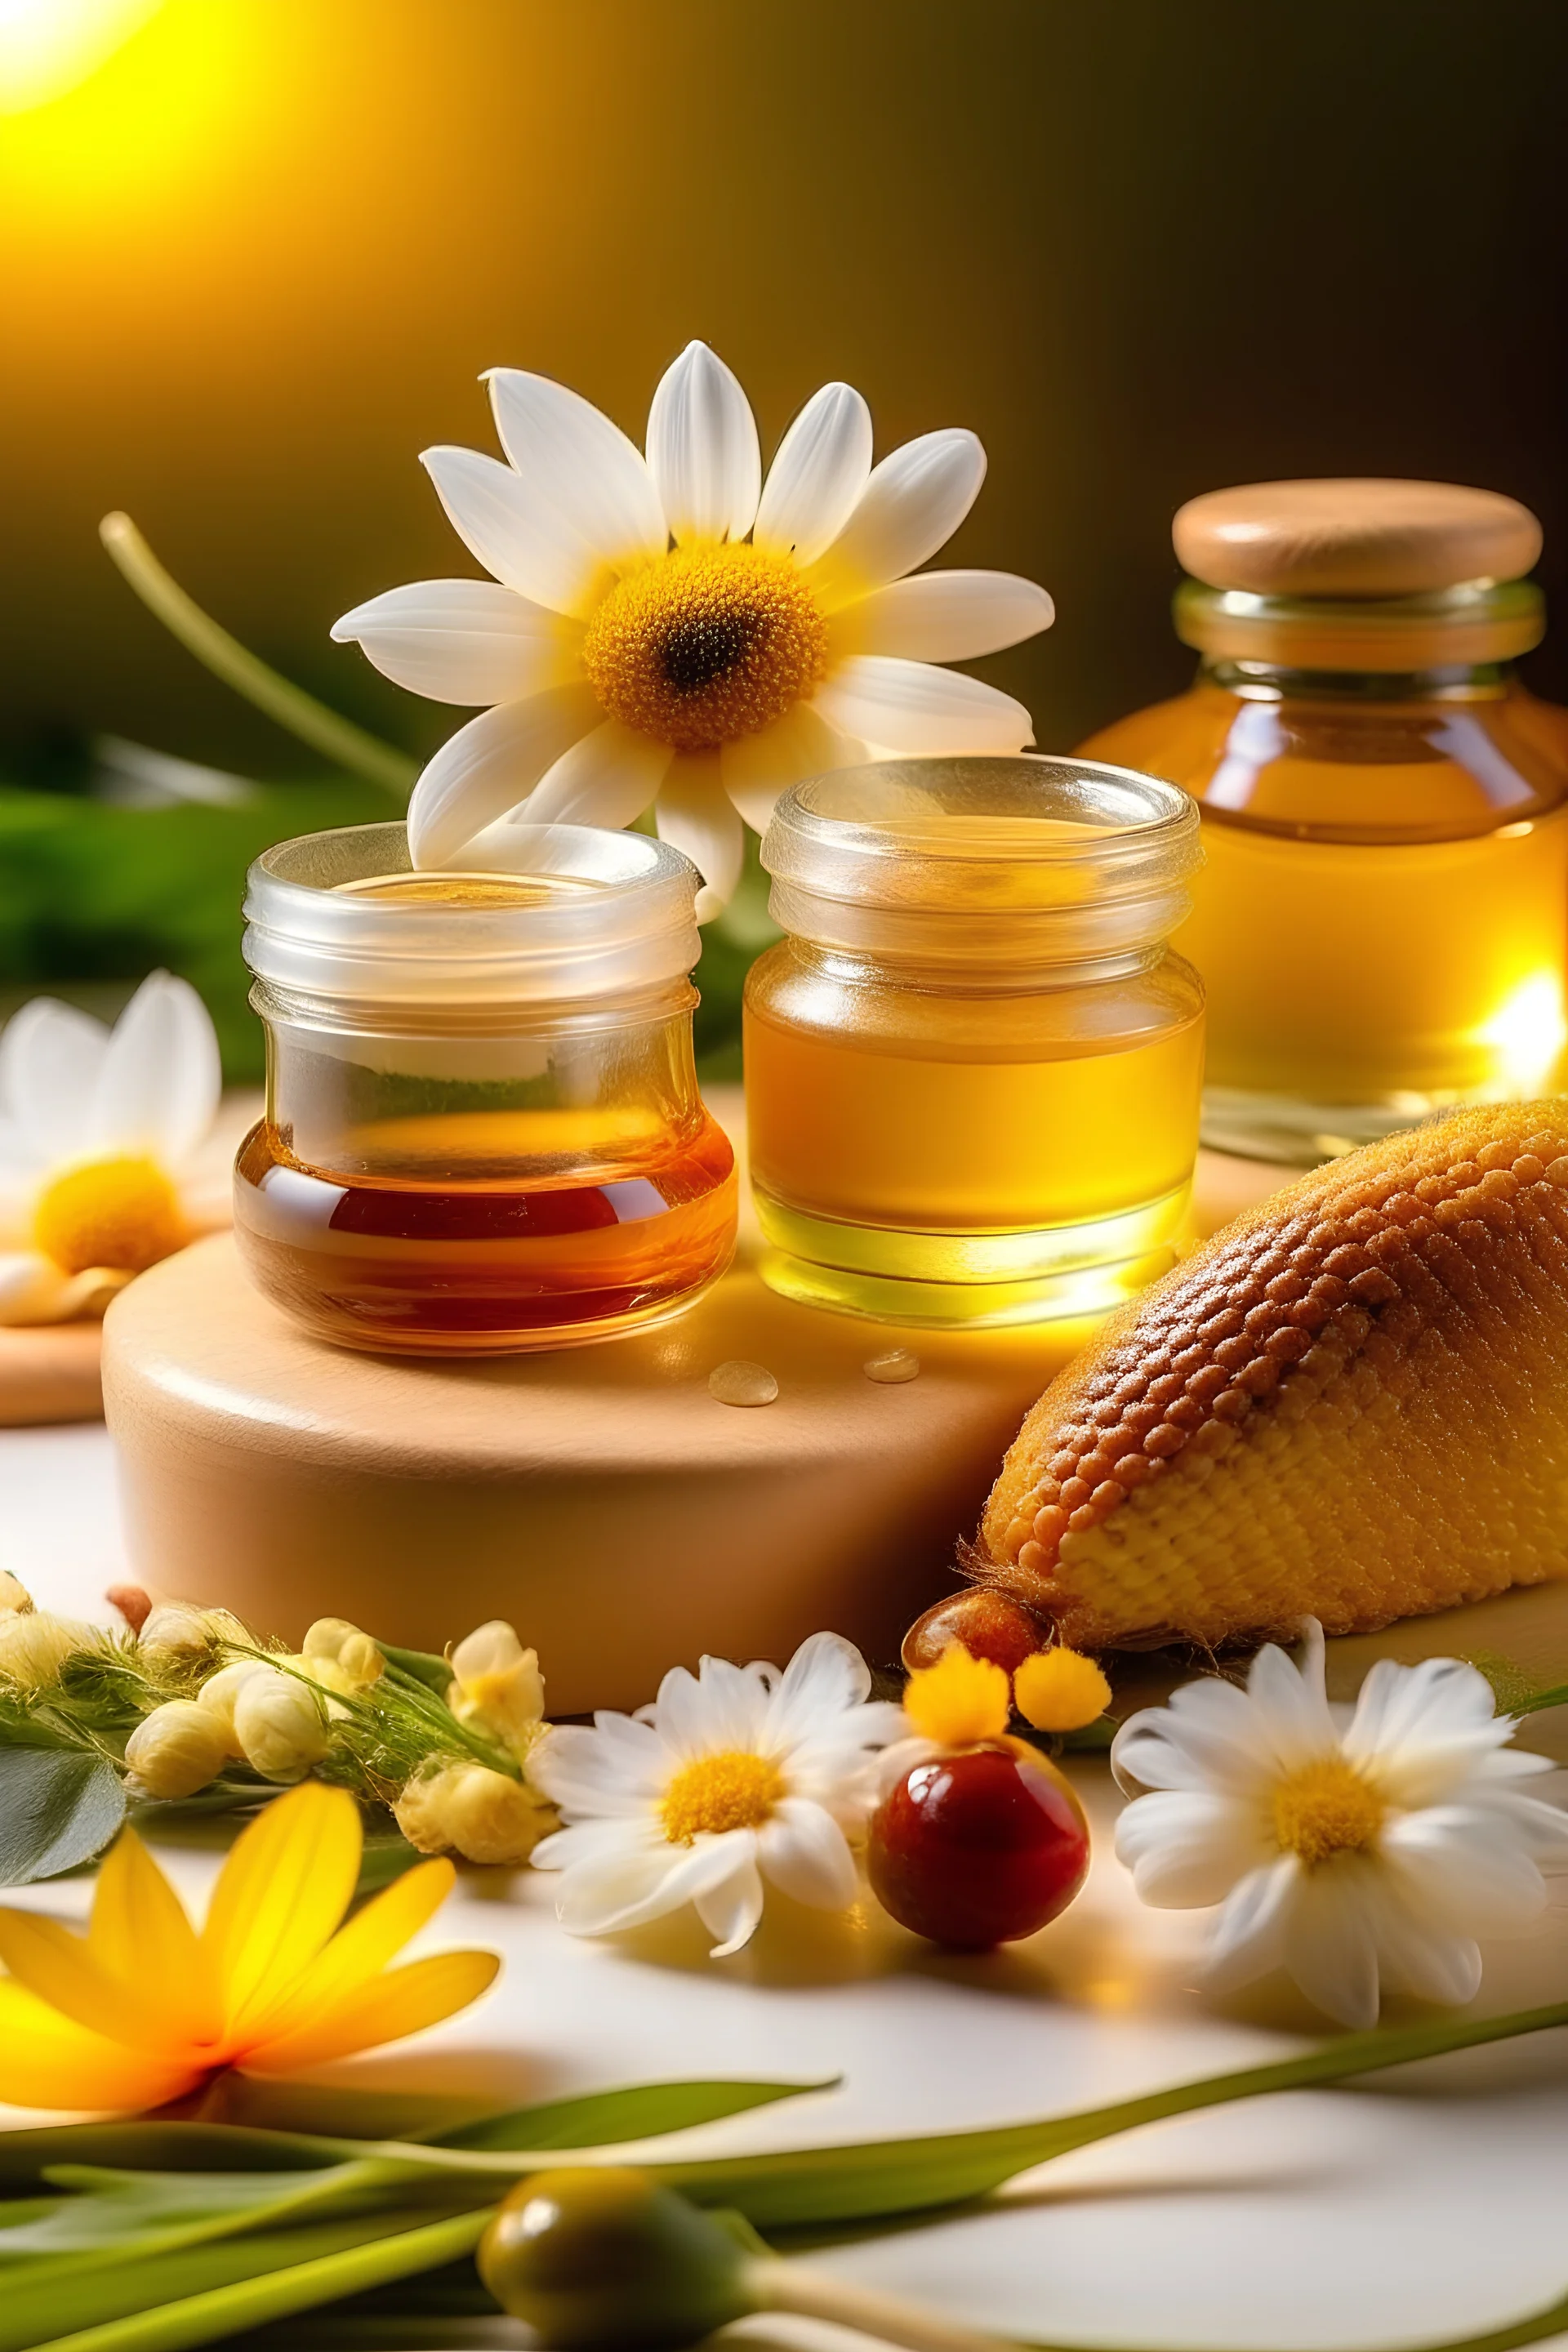 Merge the allure of nature with the efficacy of skincare, emphasizing the organic components such as honey,aleo vera,flowers and their role in achieving healthy, glowing skin.